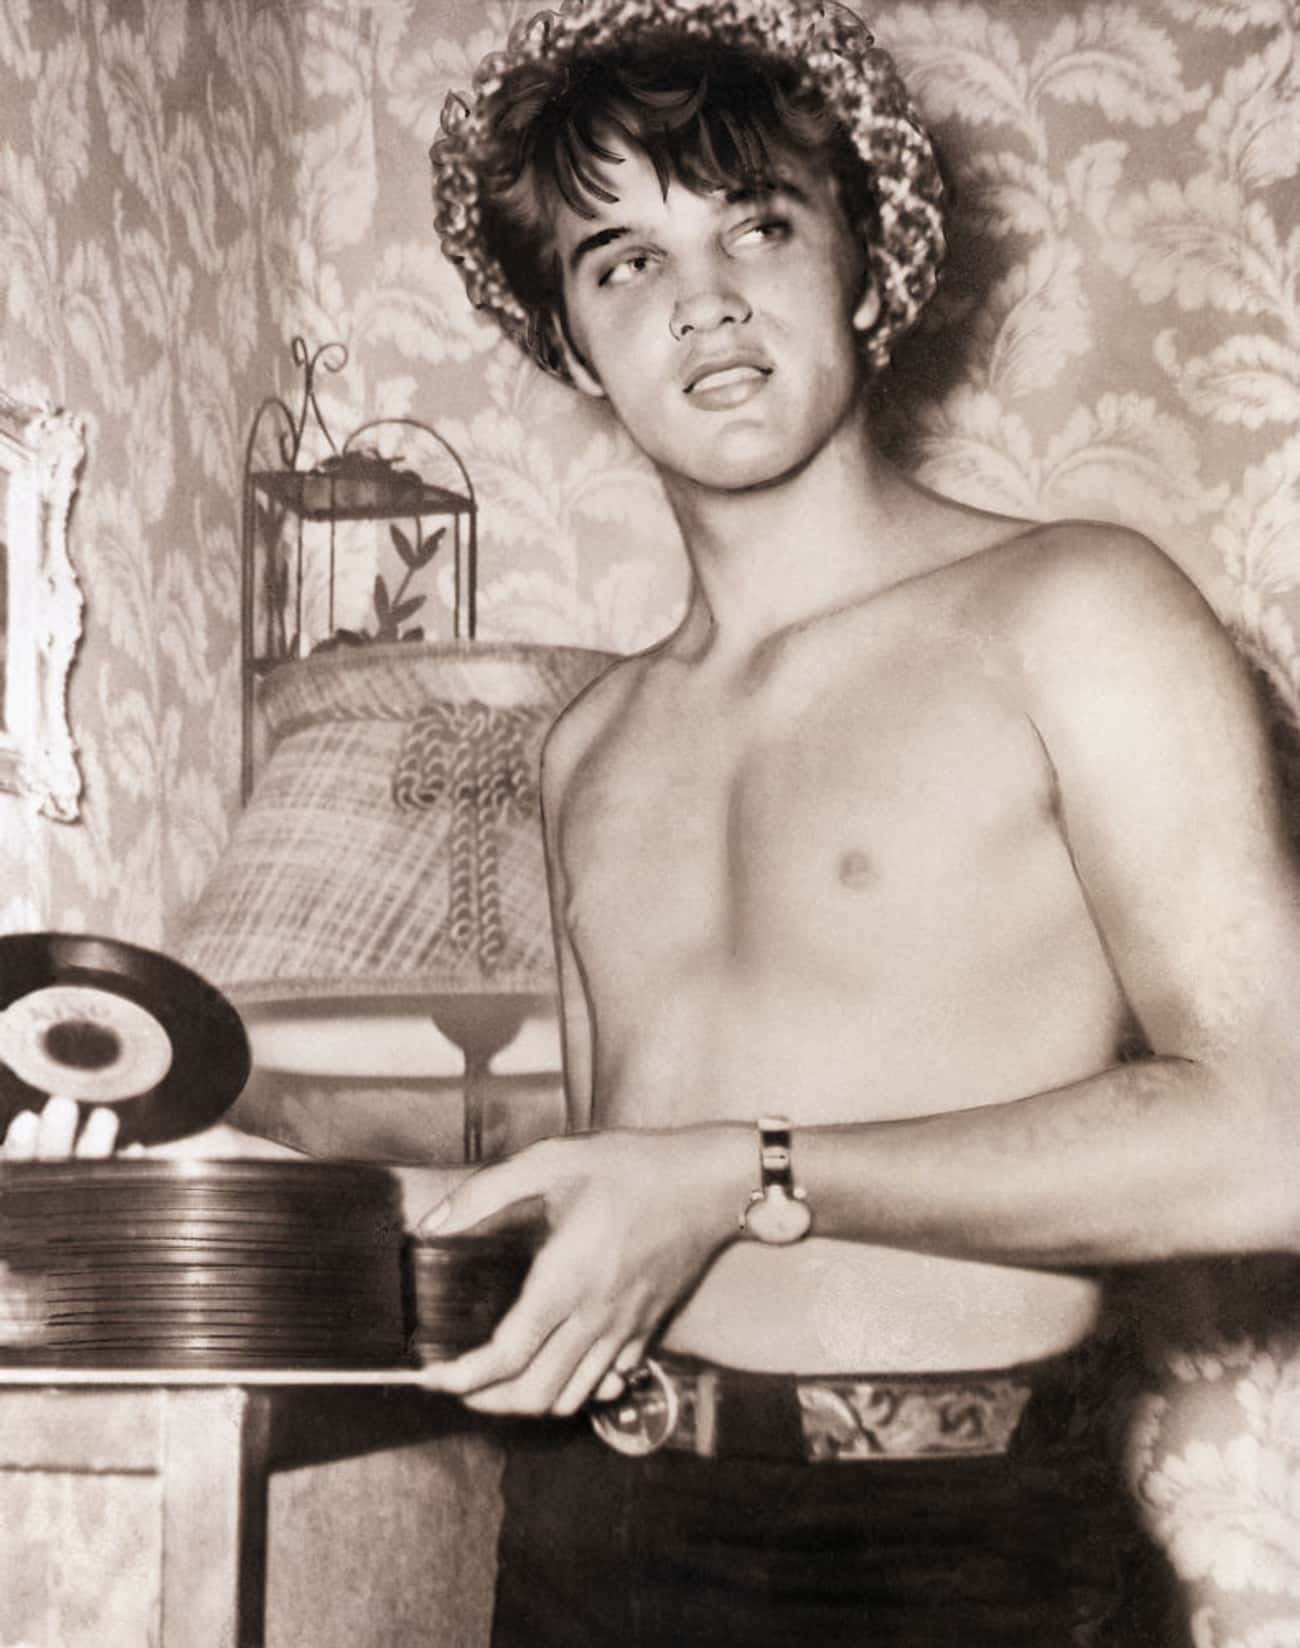 Young Elvis Presley Holding Records Shirtless